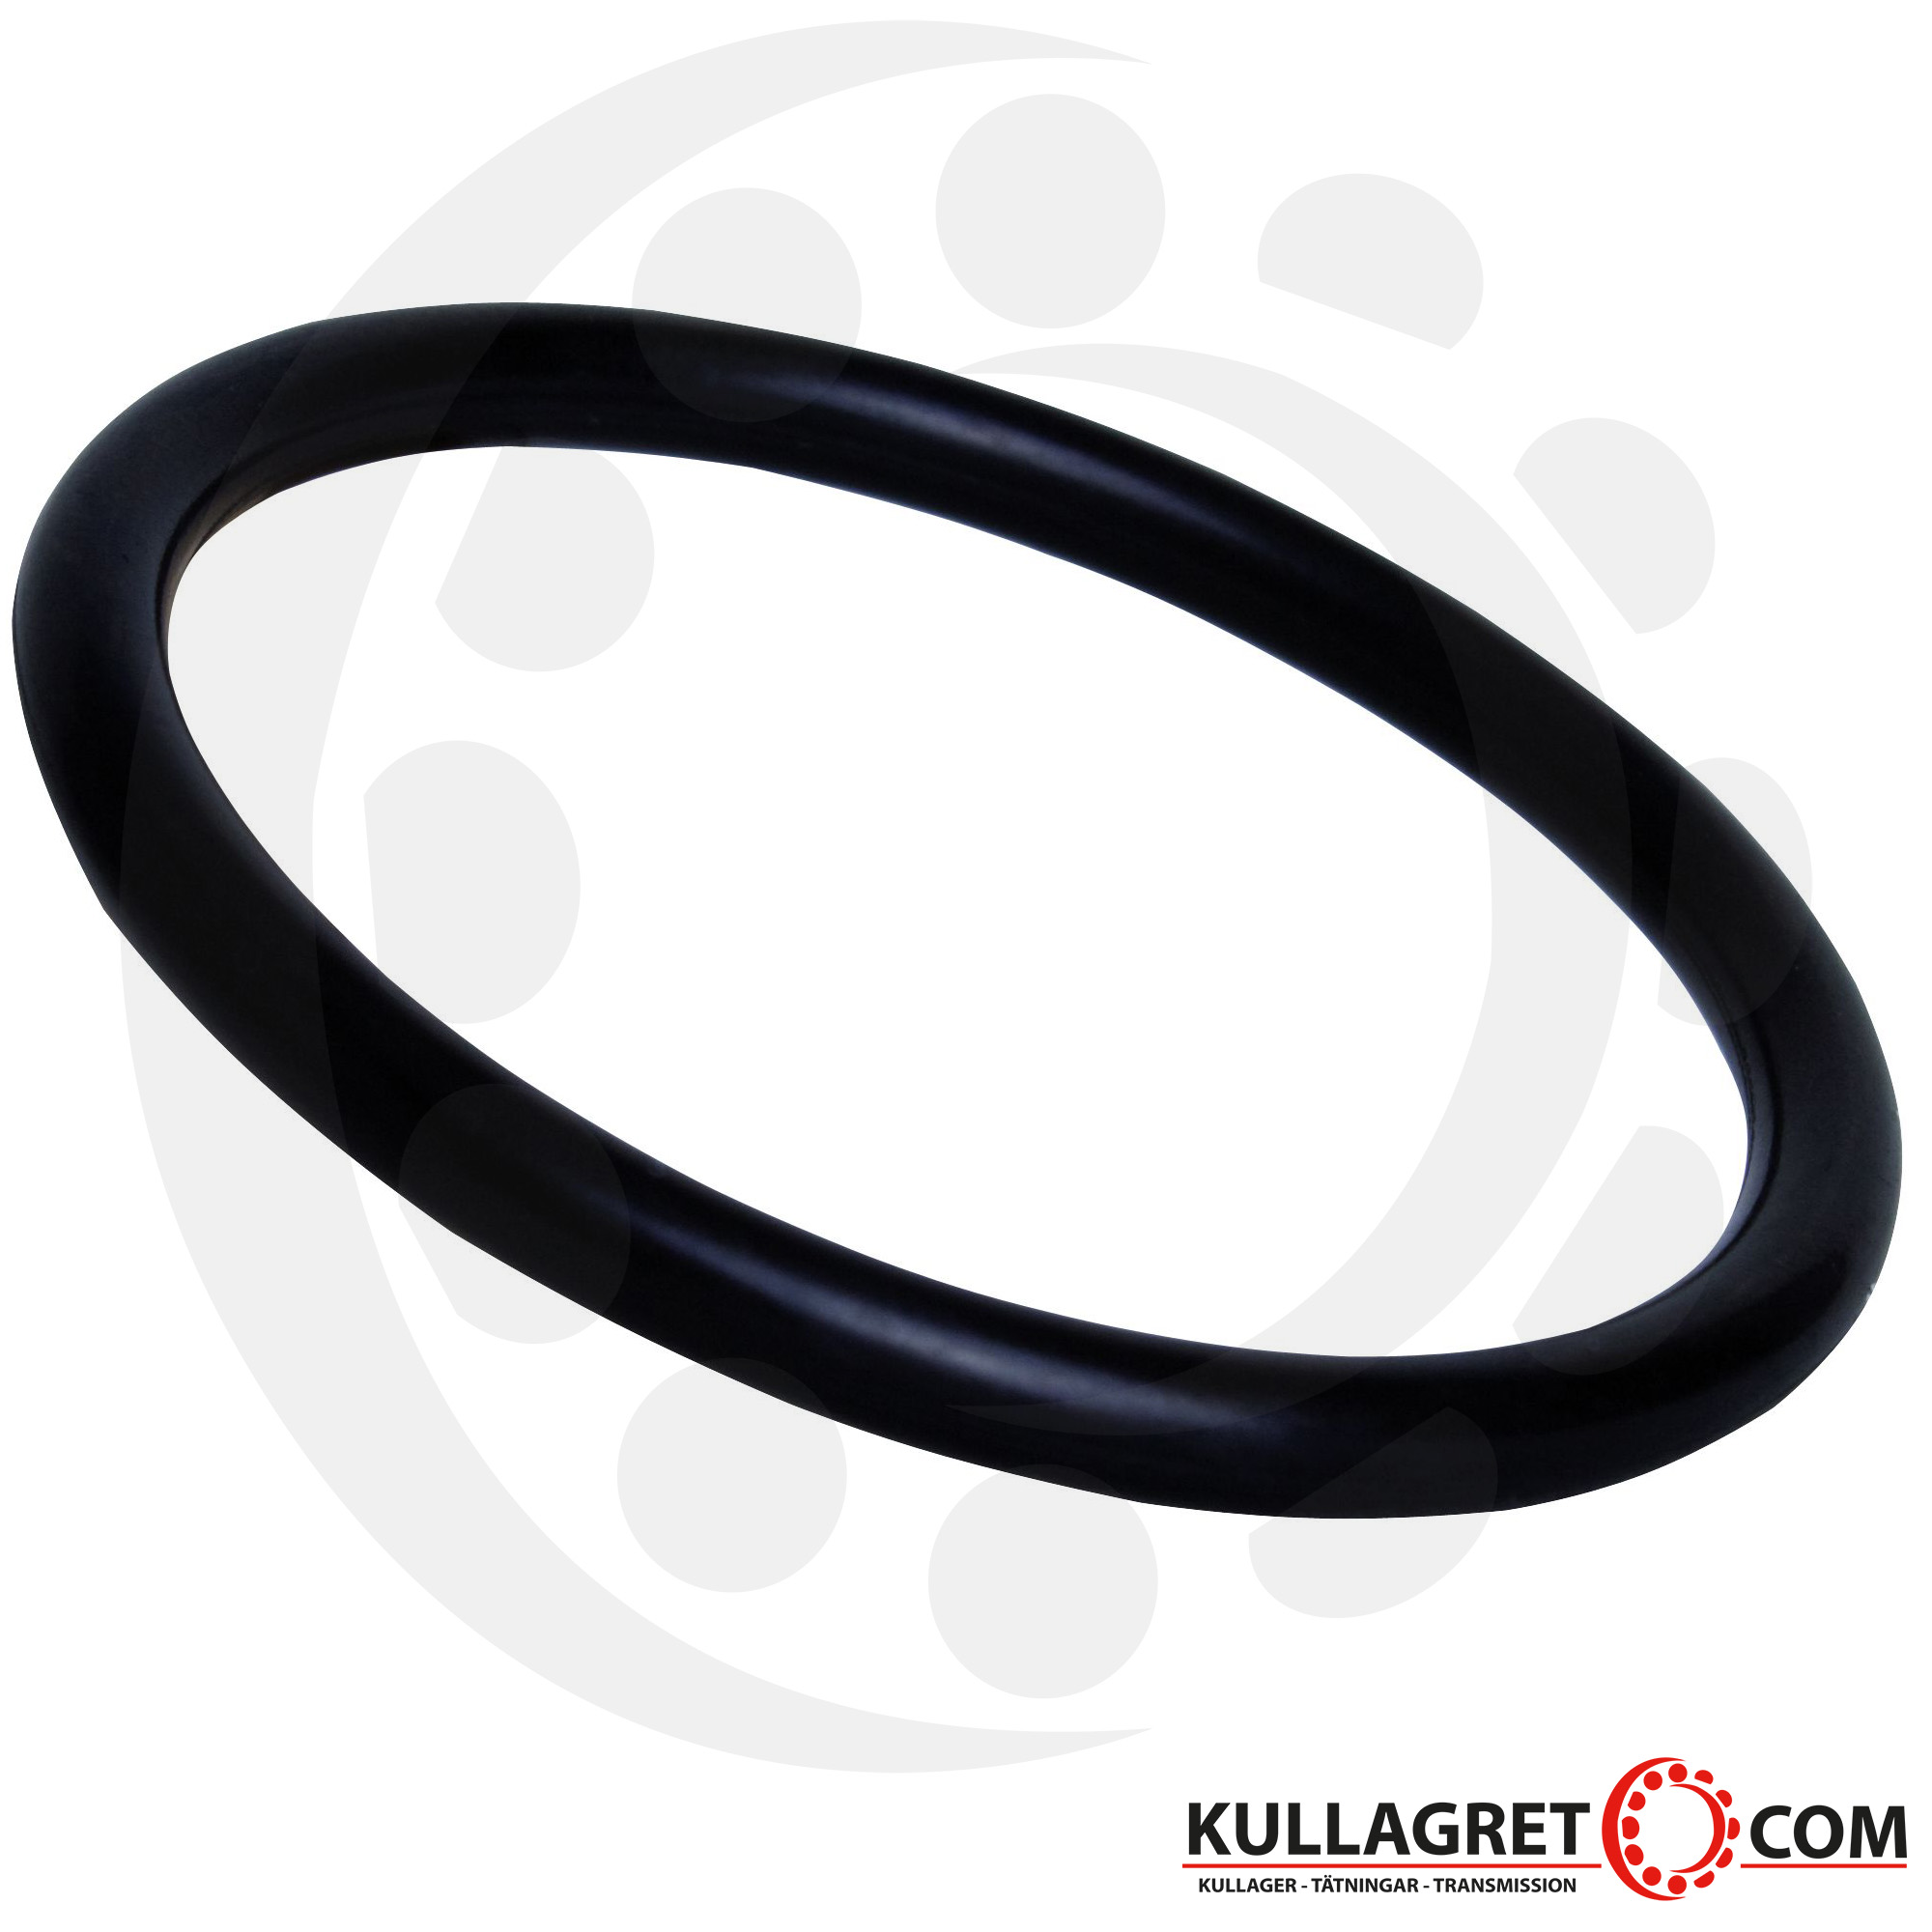 O-Ring Nullring Rundring 44,17 x 1,78 mm BS031 EPDM 70 Shore A schwarz 10 St. 